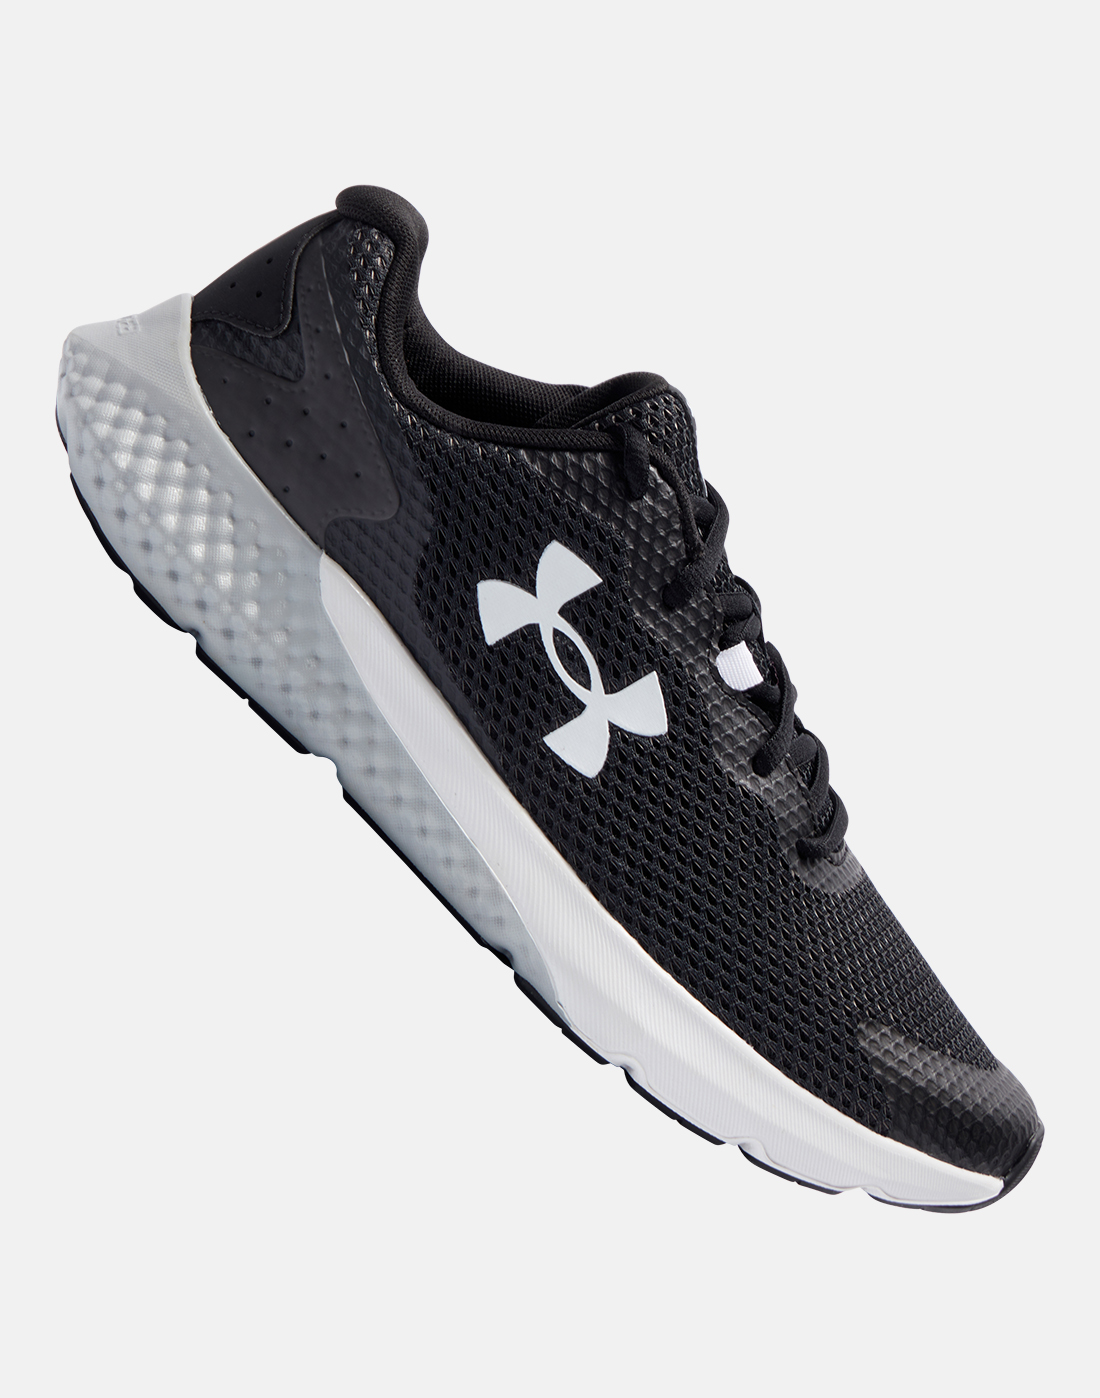 Under Armour Mens Charged Rogue 3 - Black | Life Style Sports IE